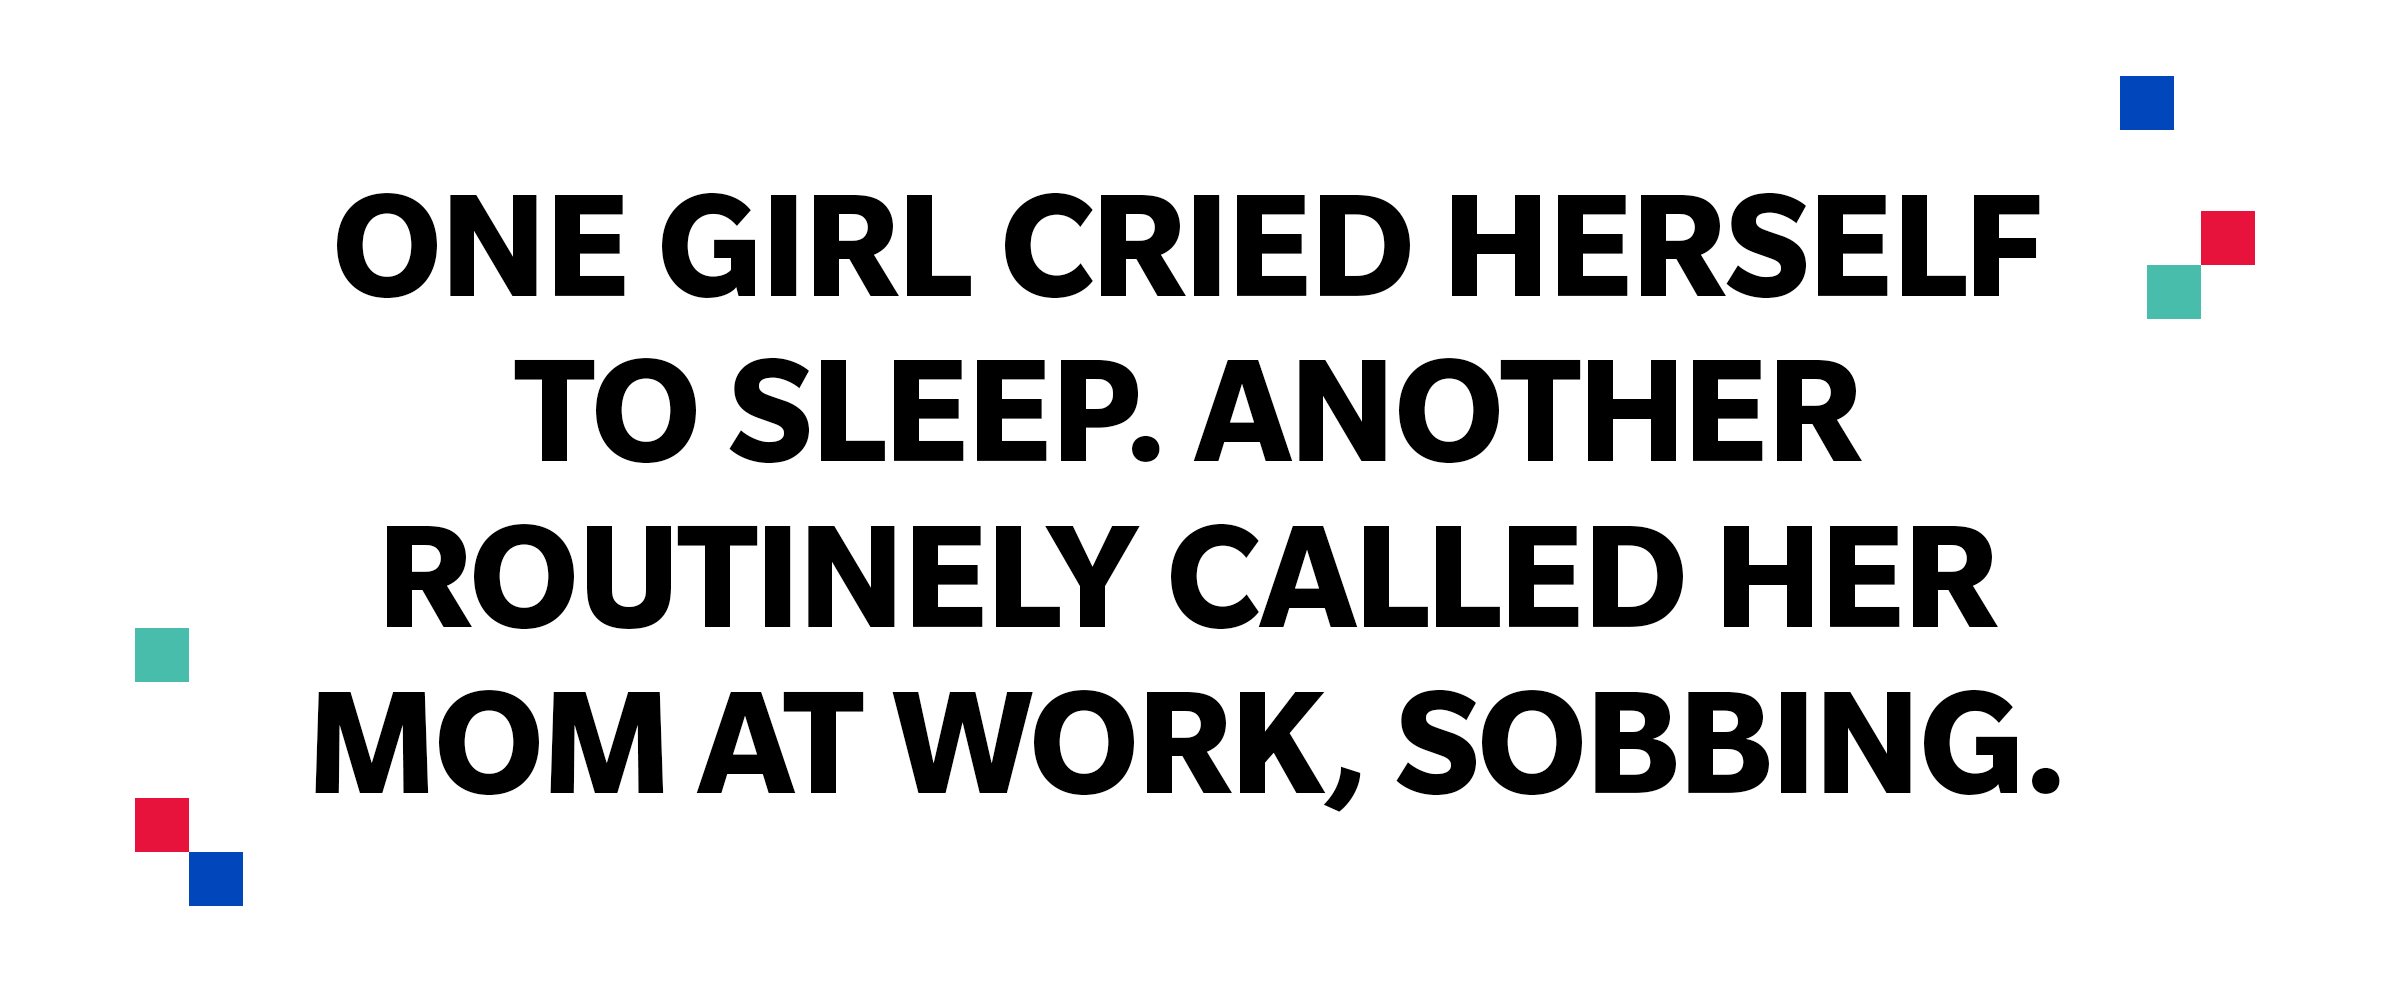 Large quote: One girl cried herself to sleep, another routinely called her mom at work, sobbing.